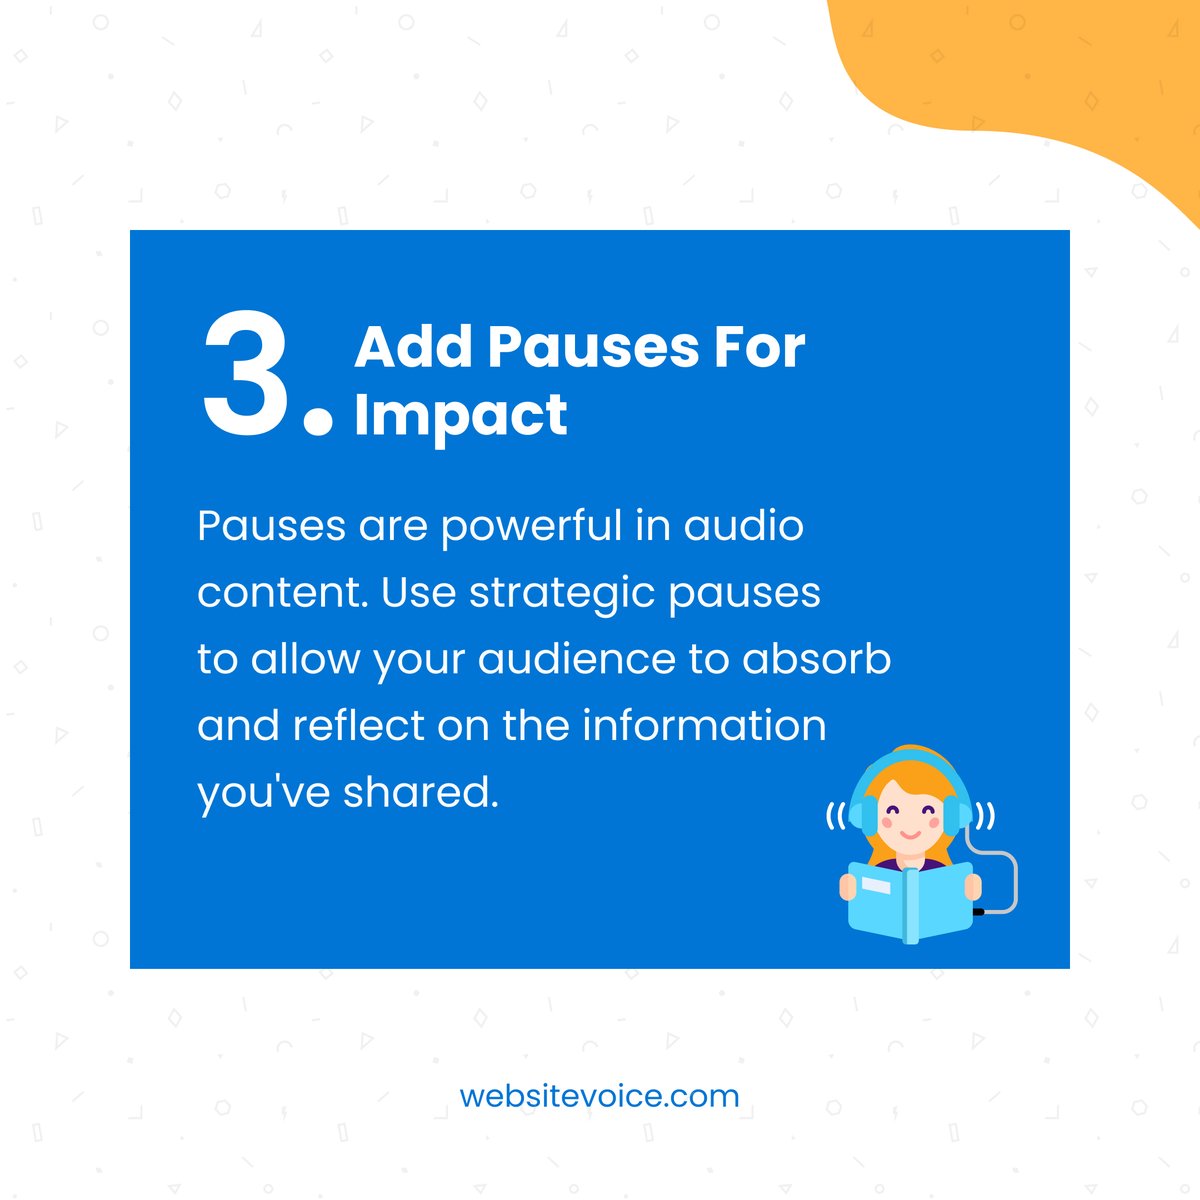 Turn up the engagement! 📷
Here are 3 tips for creating captivating audio content with WebsiteVoice.
#EngagementTips #CaptivatingContent #AudioContent #WebsiteVoiceTips #VoiceEngagement #AudioExperience #WebsiteEngagement #ContentCreation #AudioMarketing #WebsiteVoice